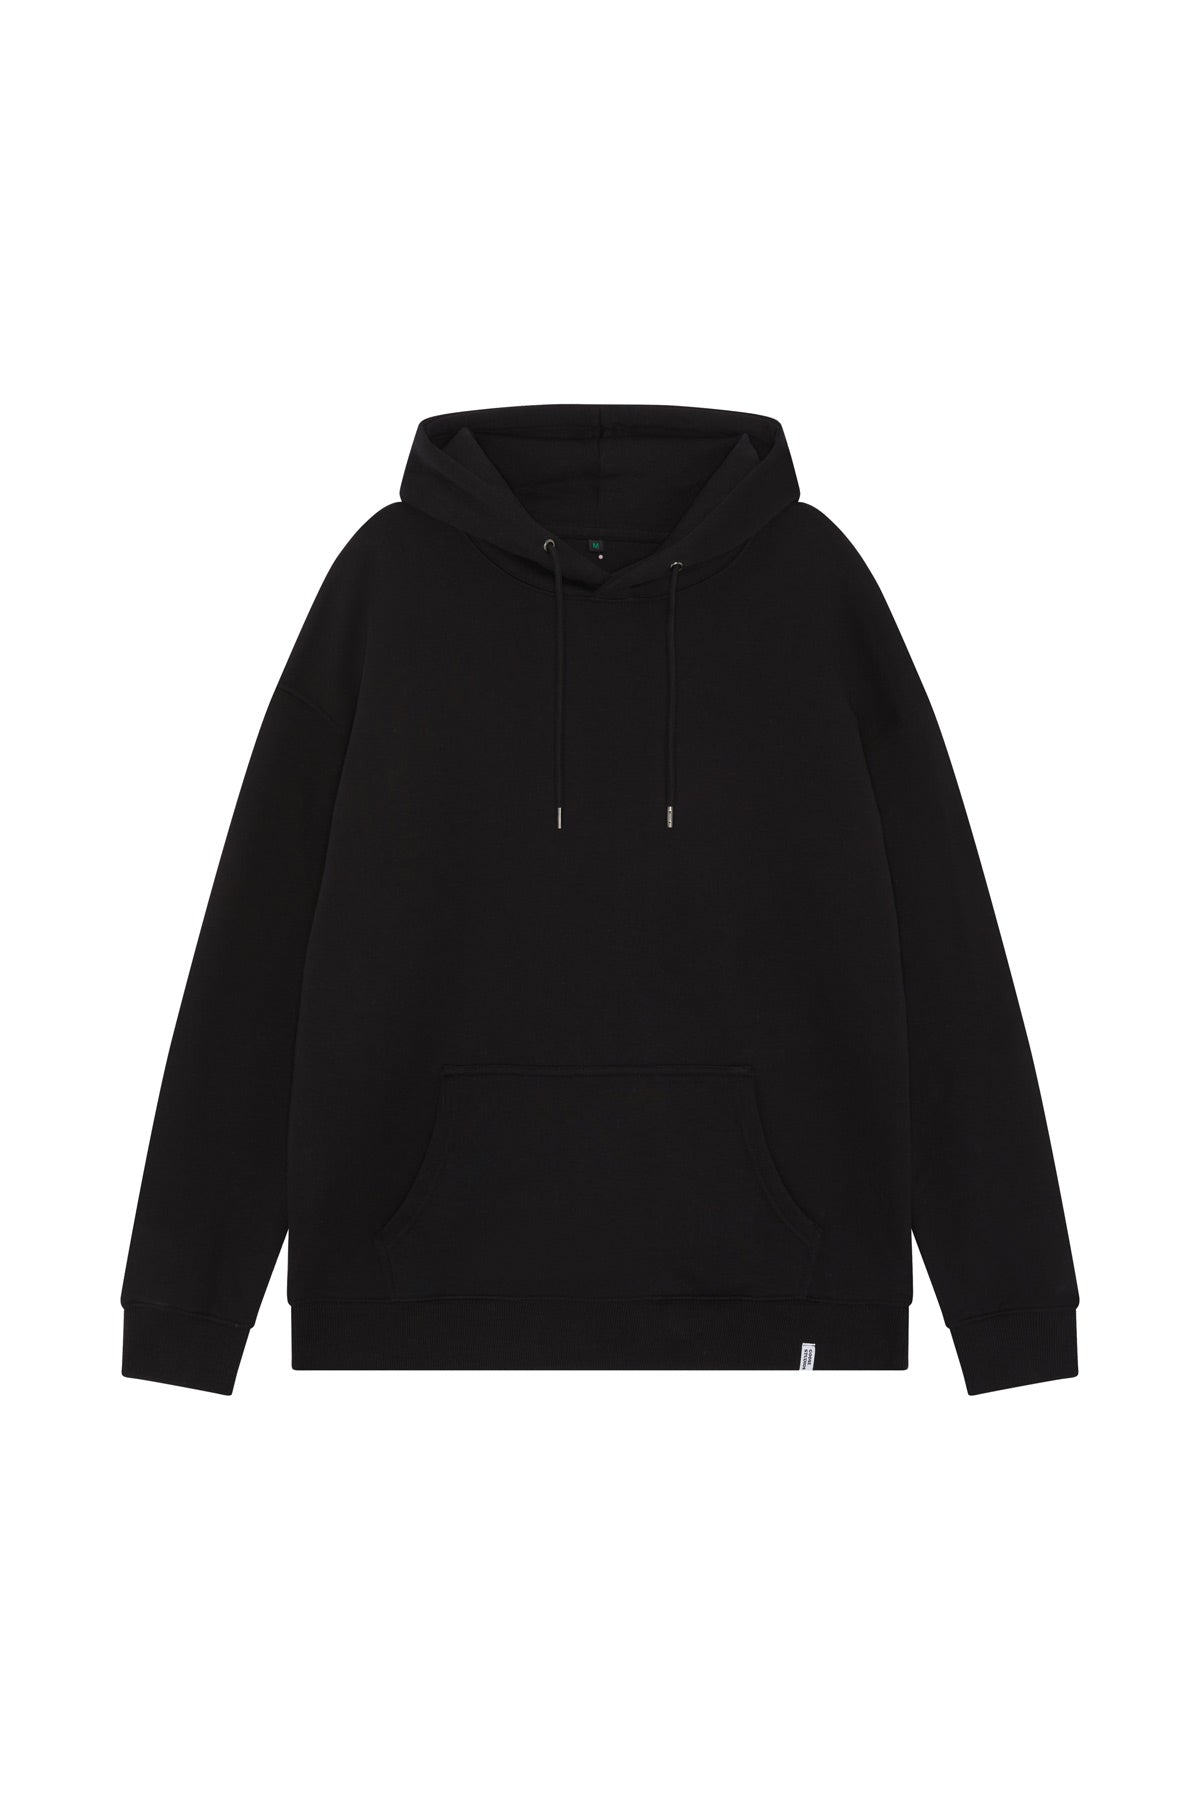 Black Organic Cotton Hoodie - Relaxed